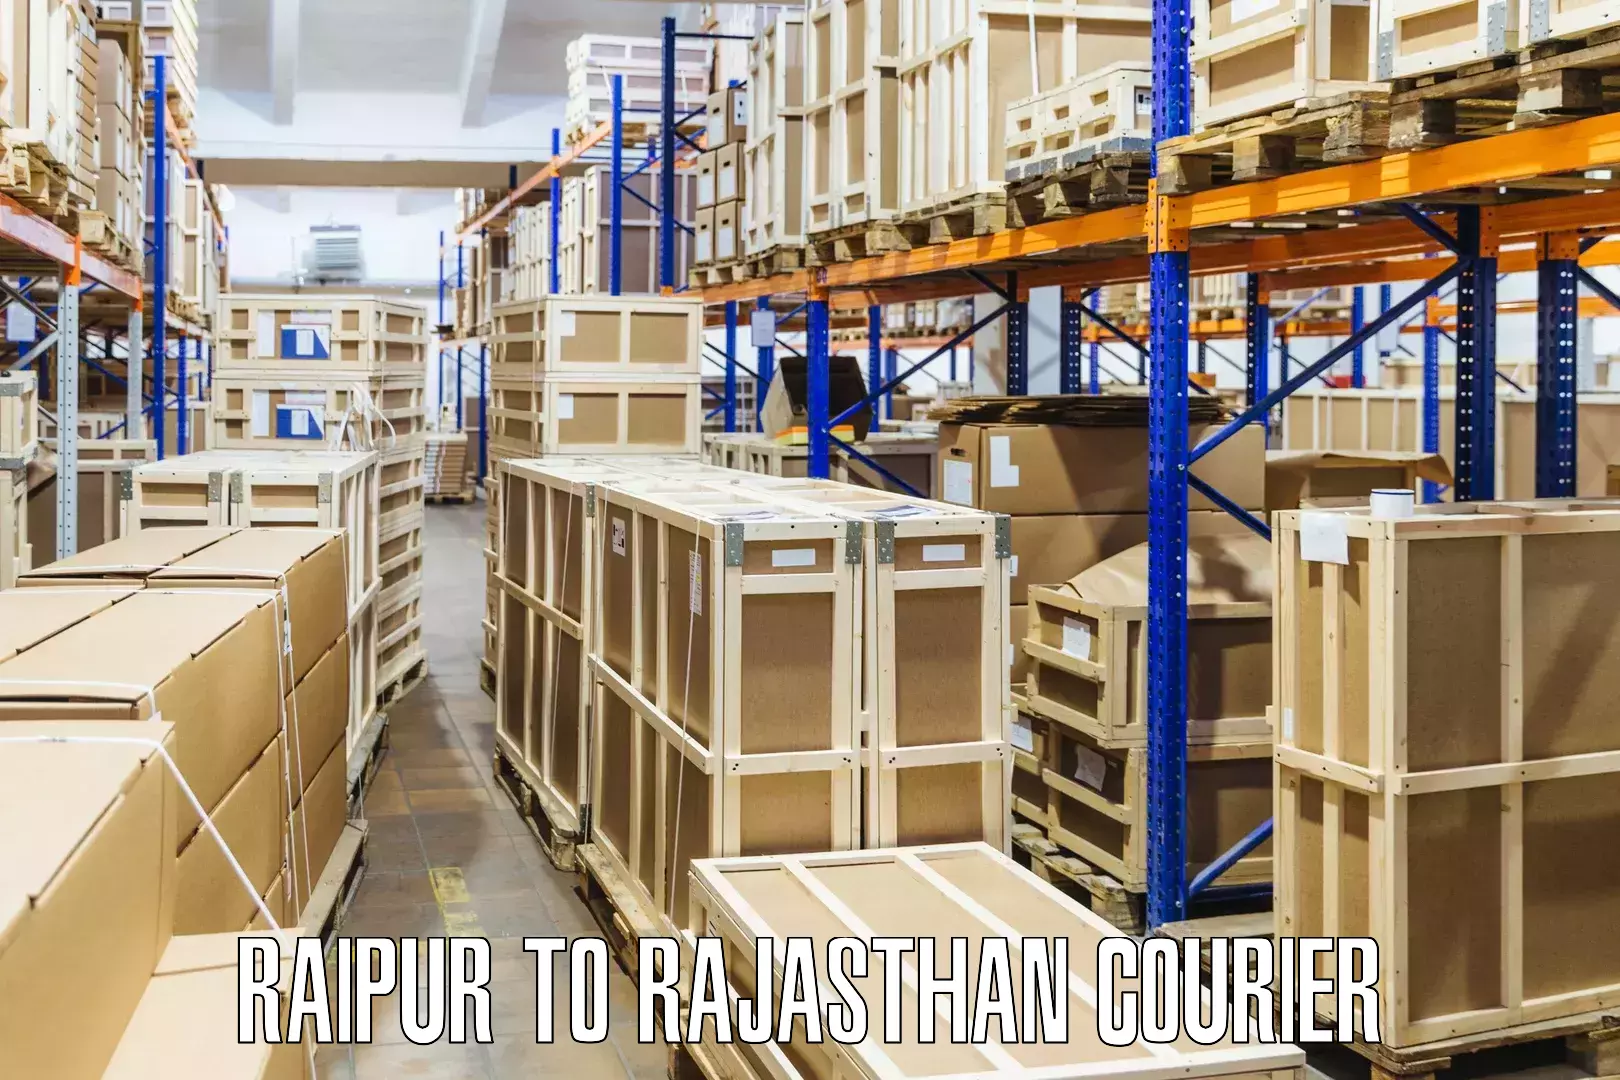 Express delivery solutions Raipur to Karauli